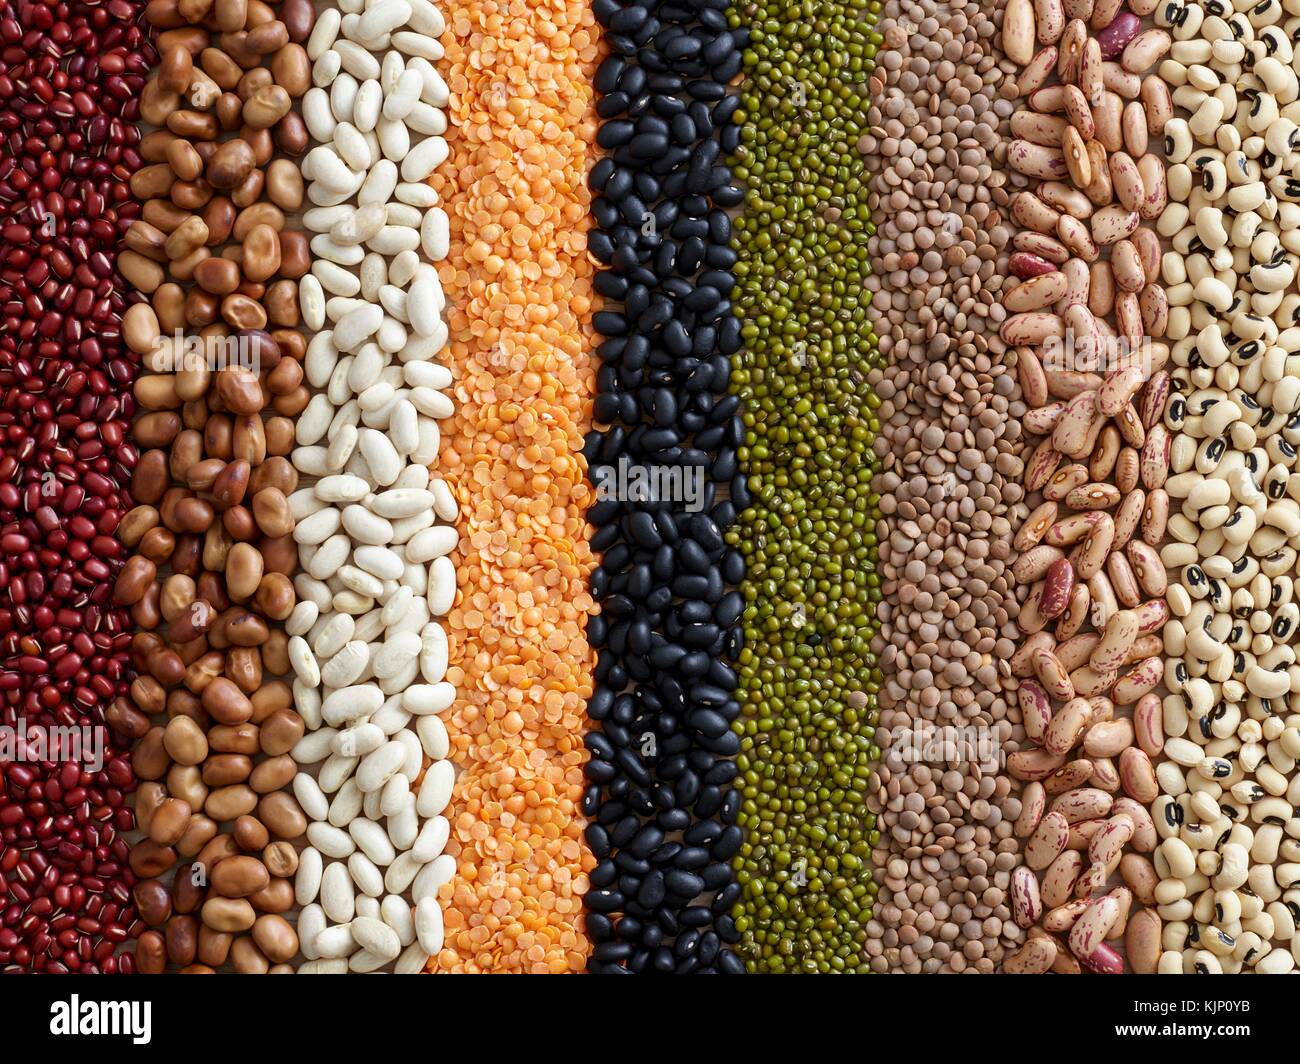 Pulses in rows. Stock Photo